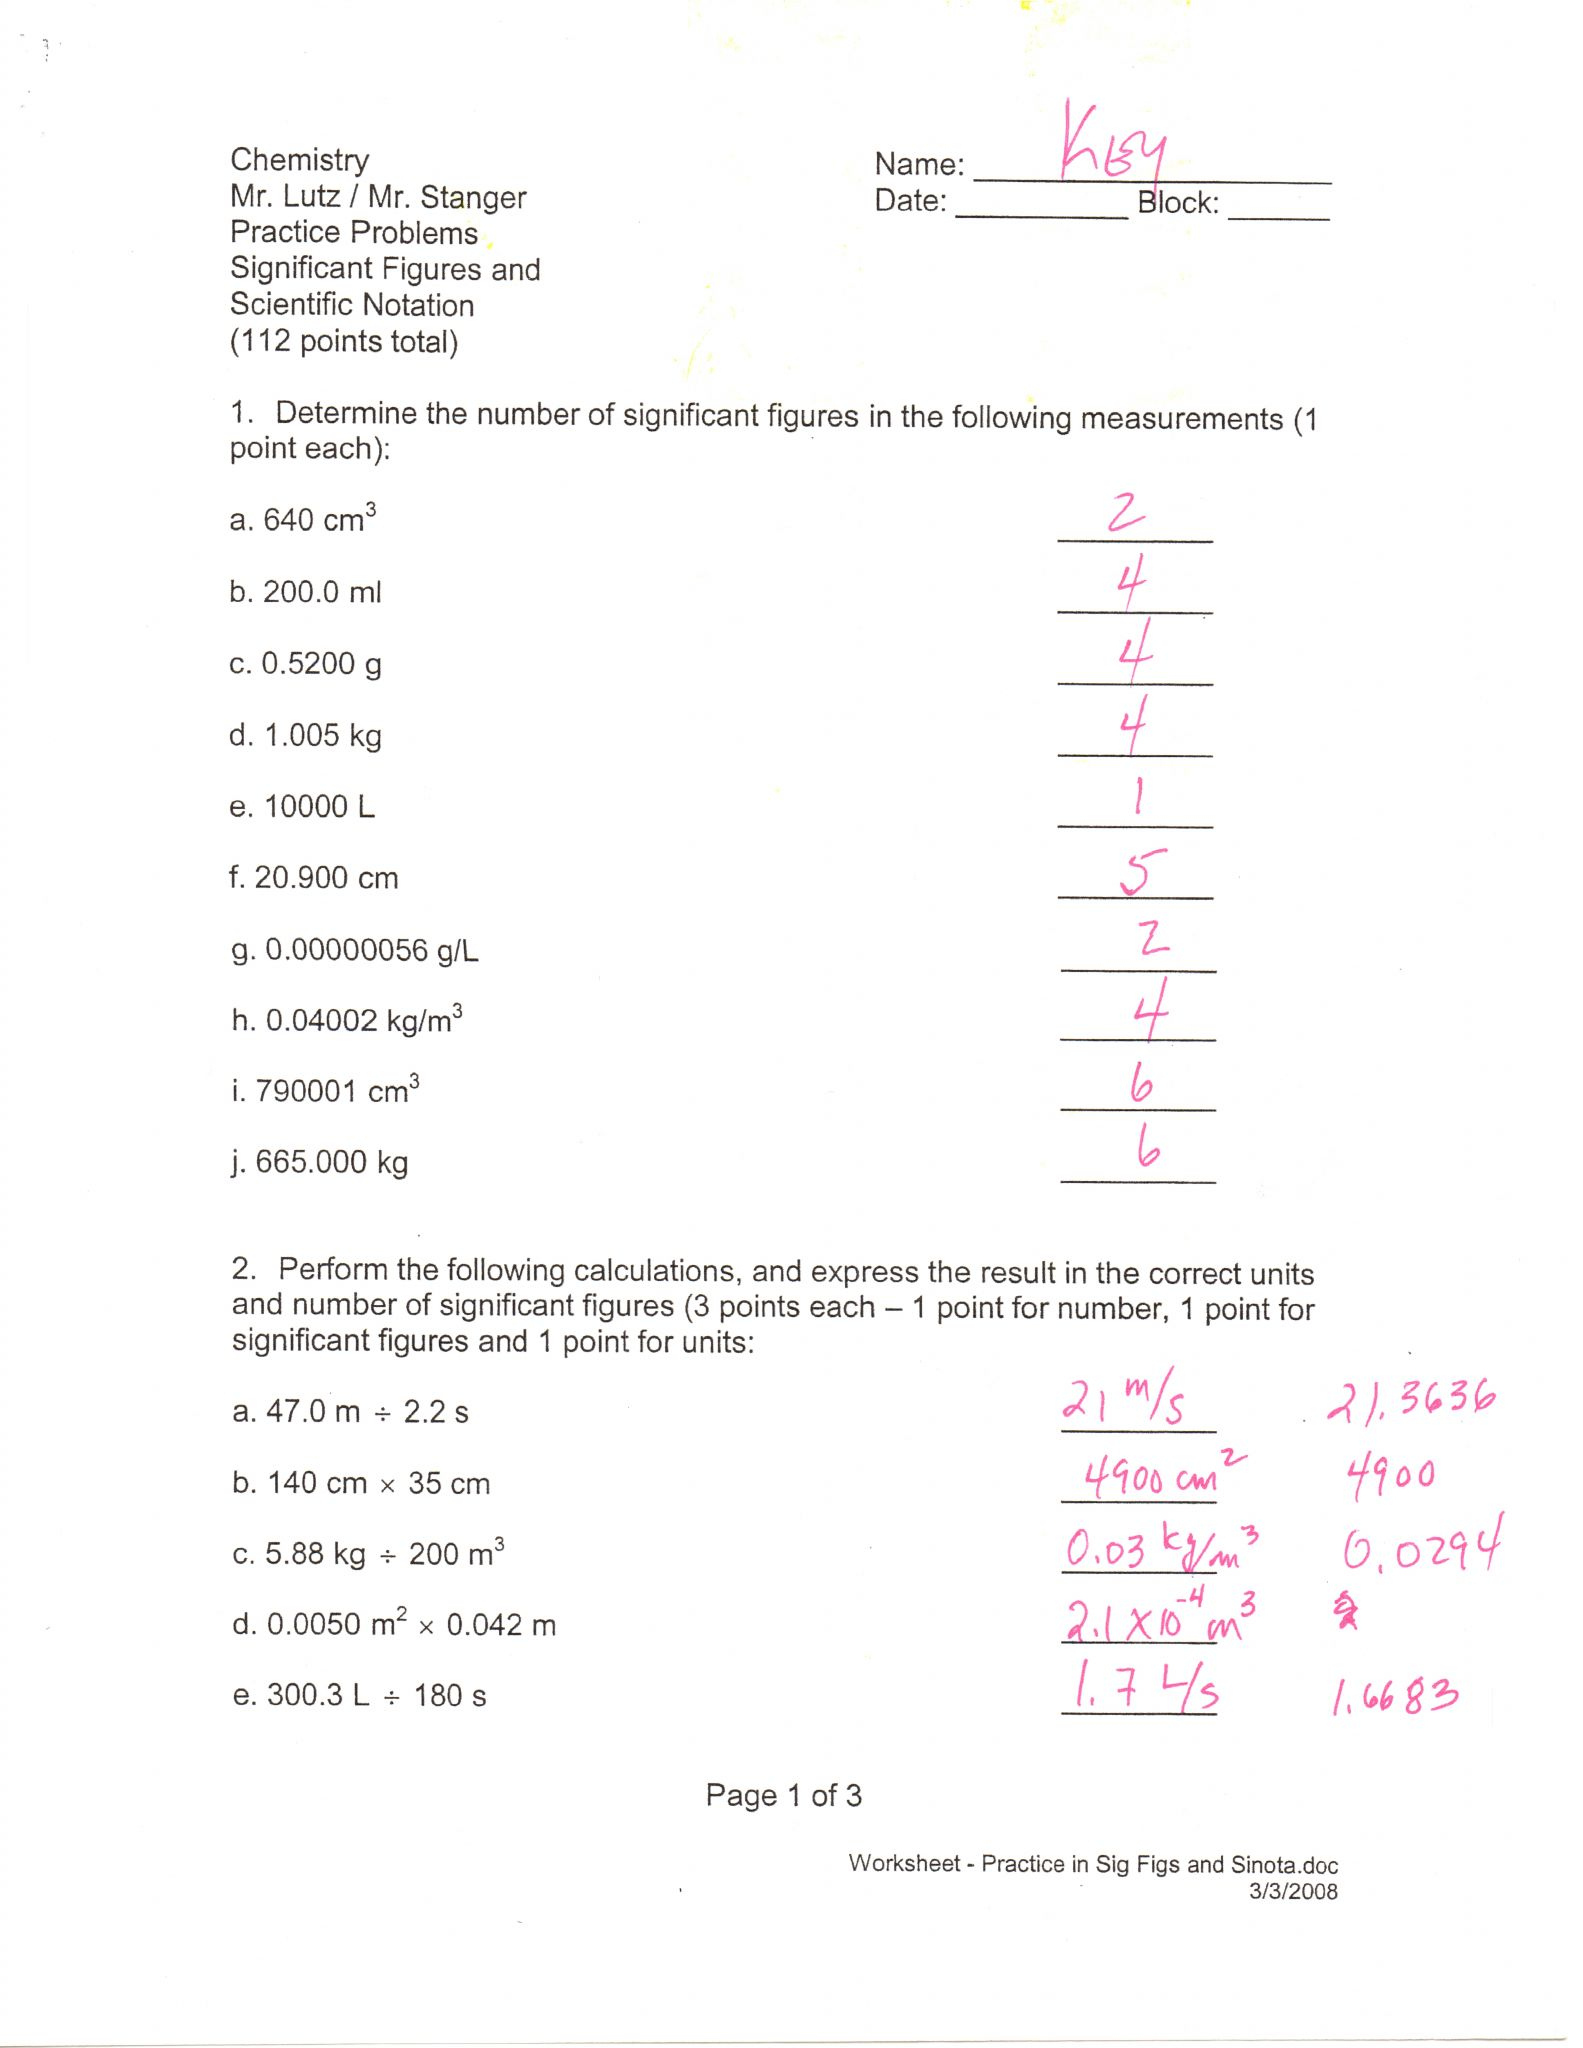 Worksheet 2 Scientific Notation Answers Db excel